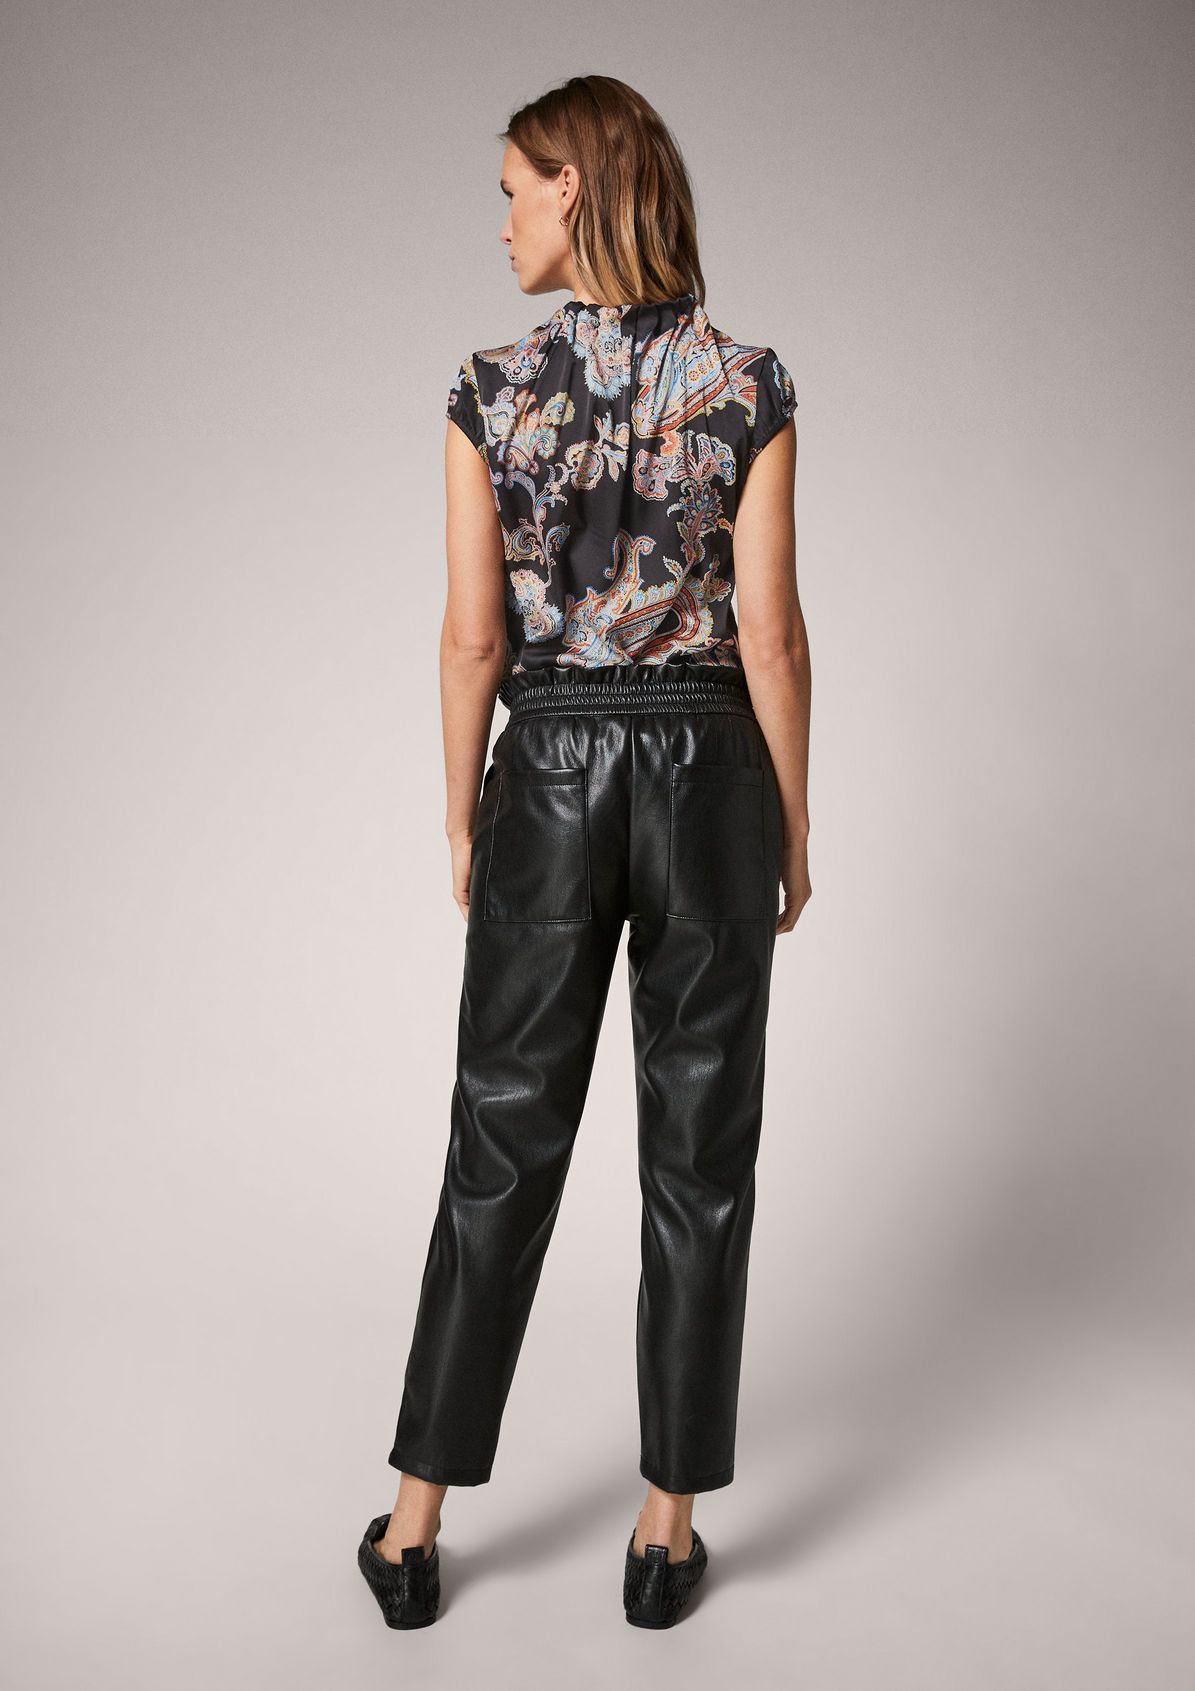 Satin blouse with a paisley pattern from comma